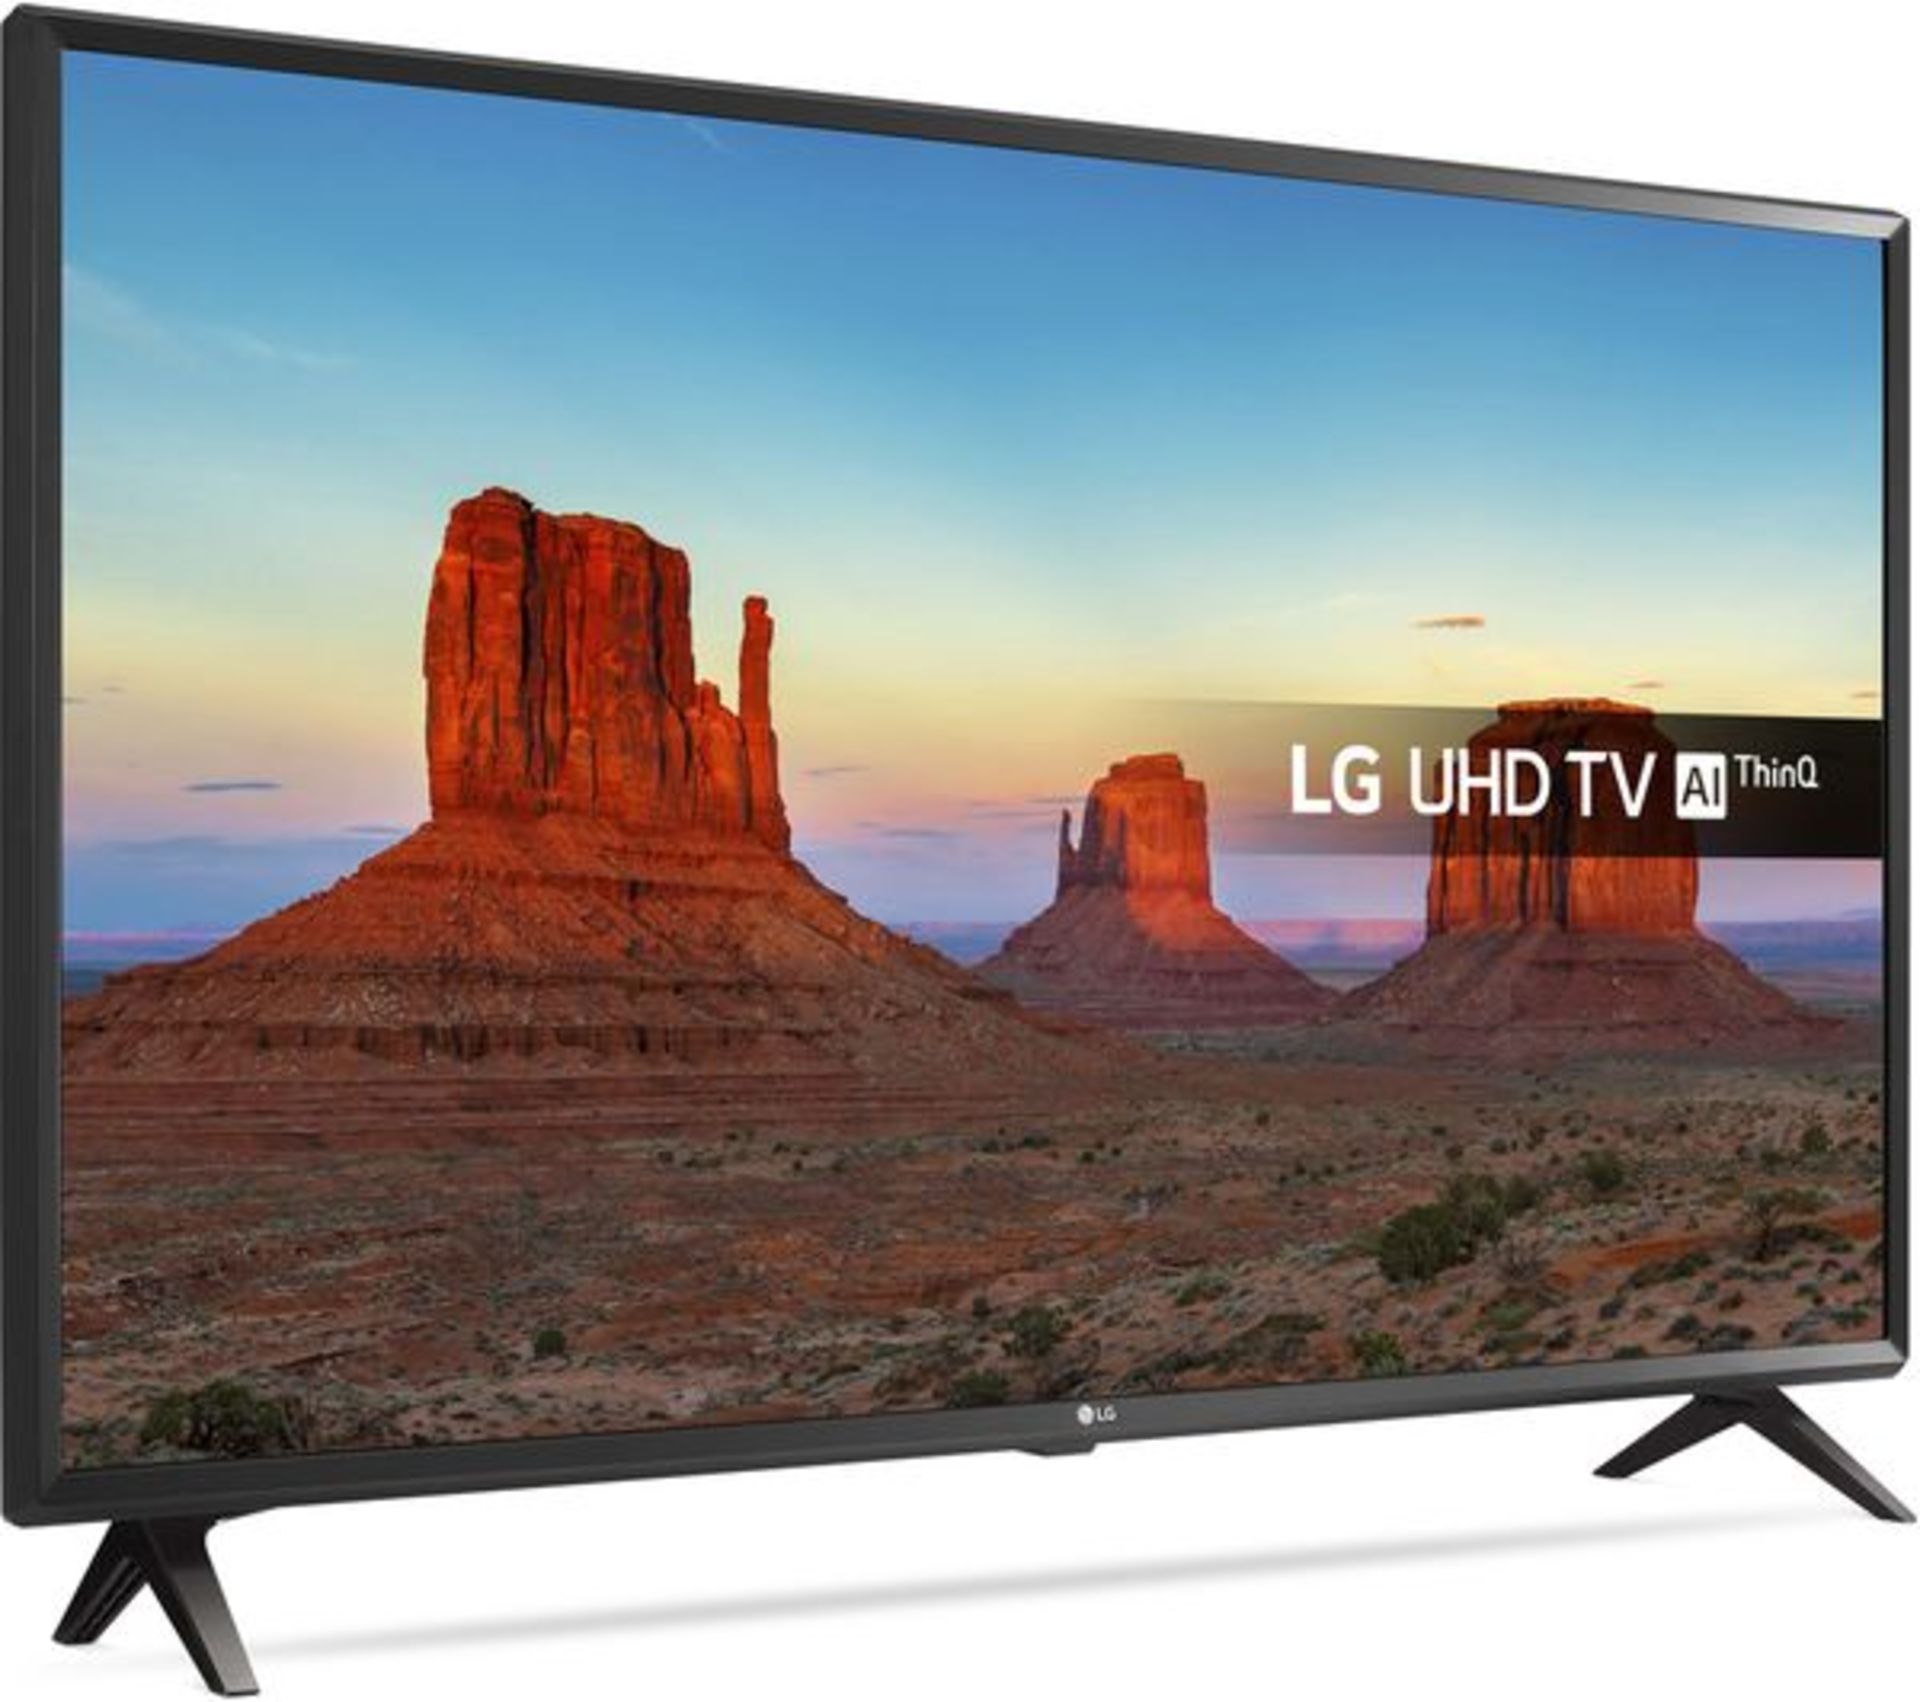 V Grade A LG 49 Inch ACTIVE HDR 4K ULTRA HD LED SMART TV WITH FREEVIEW HD & WEBOS & WIFI - AI TV